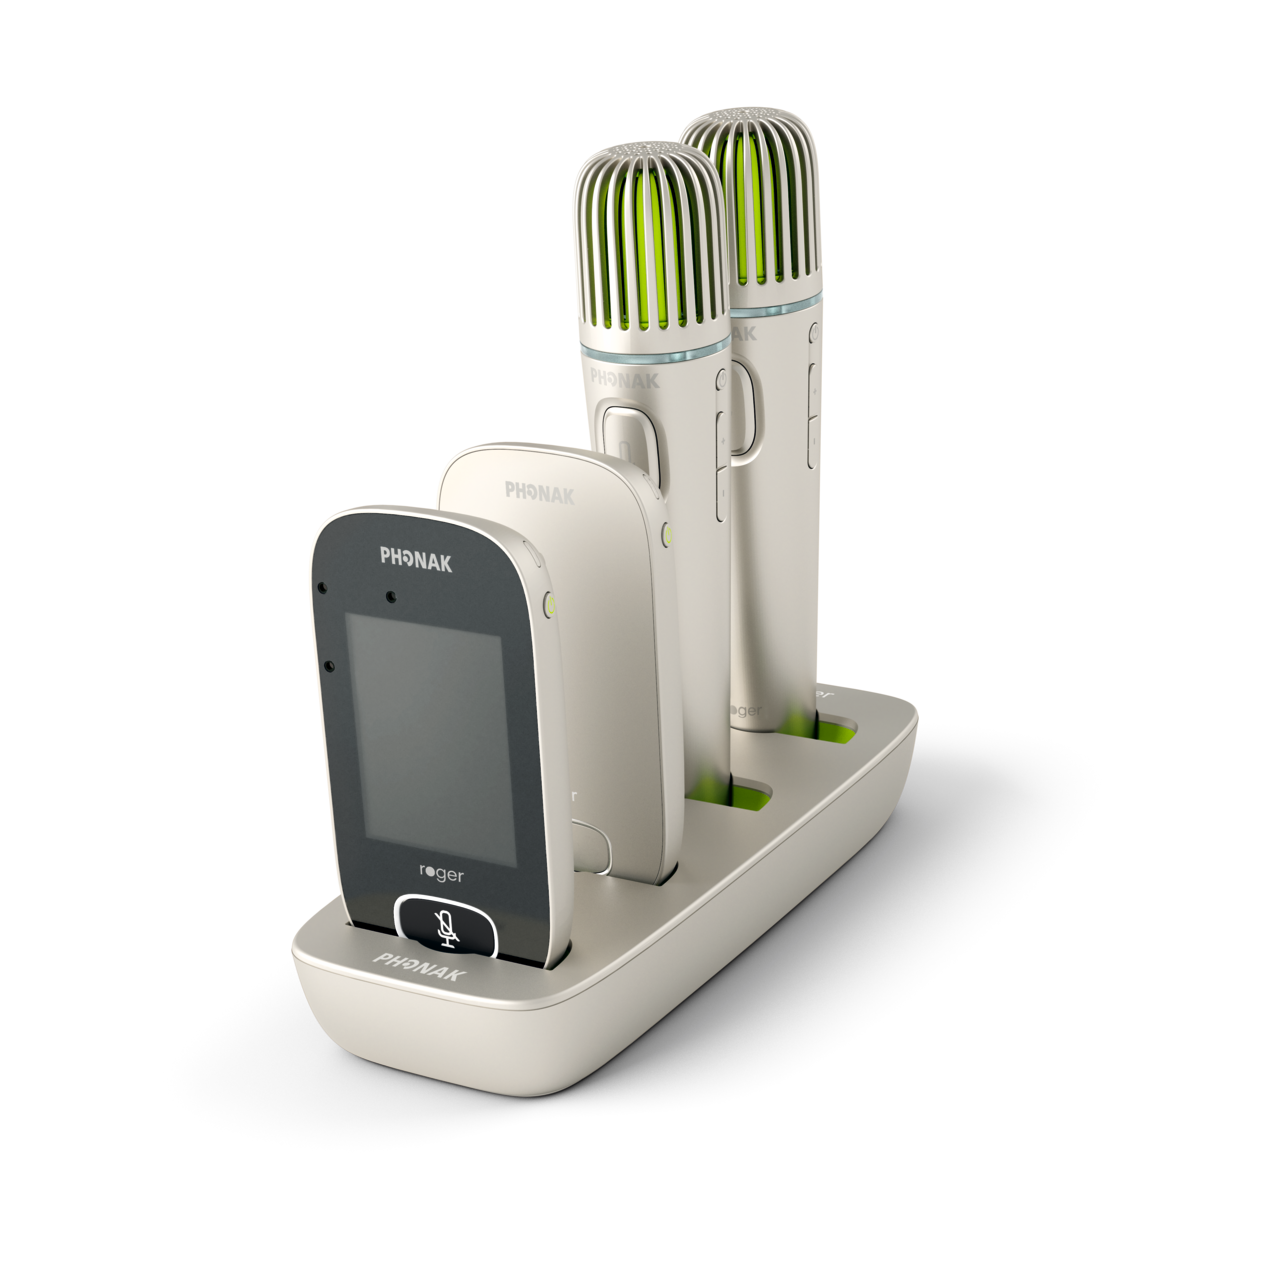 Phonak Roger Charging Rack with four different hearing aid accessories charging.